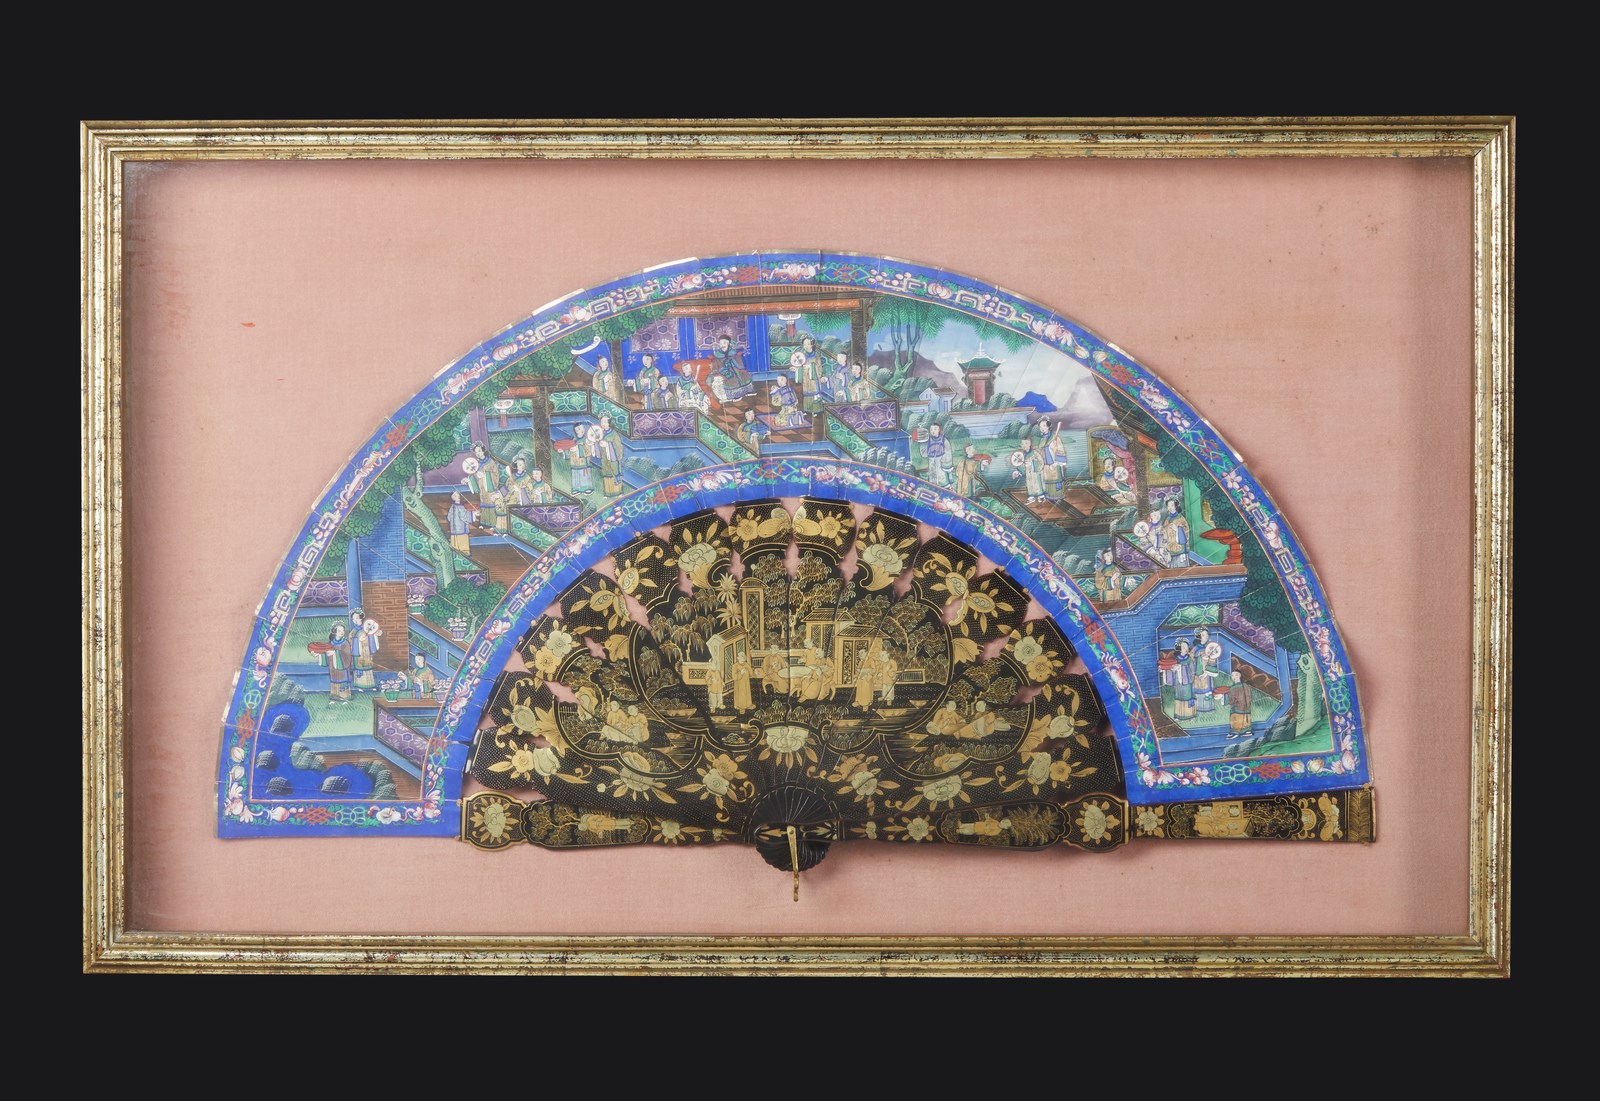 A Canton painted fan China, Qing dynasty, 19th century Cm 55,00 x 29,00 - Image 2 of 2